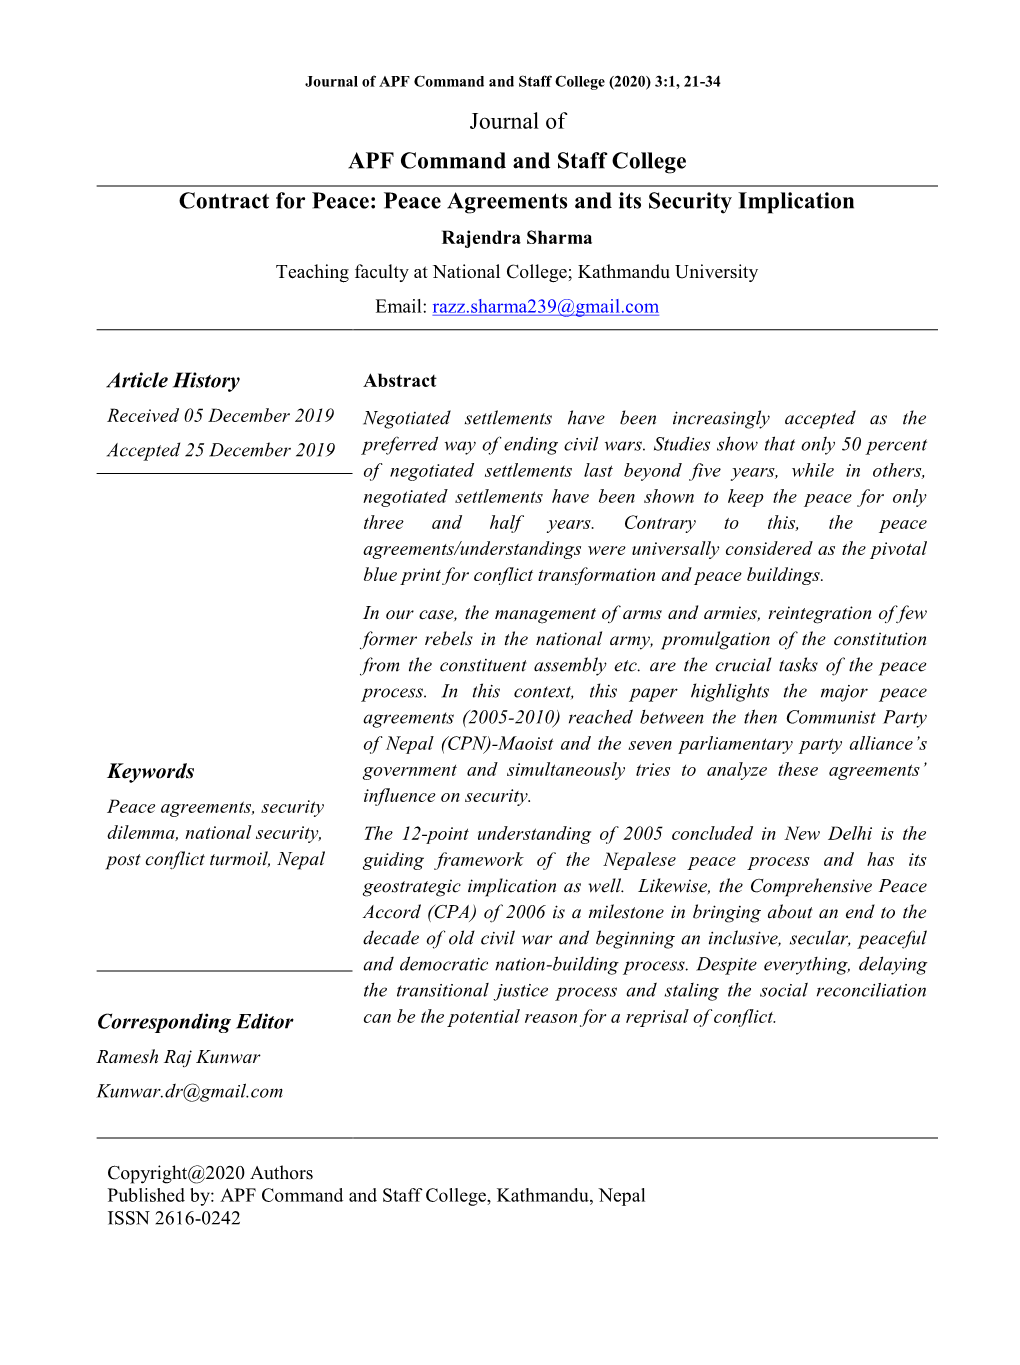 Journal of APF Command and Staff College Contract for Peace: Peace Agreements and Its Security Implication